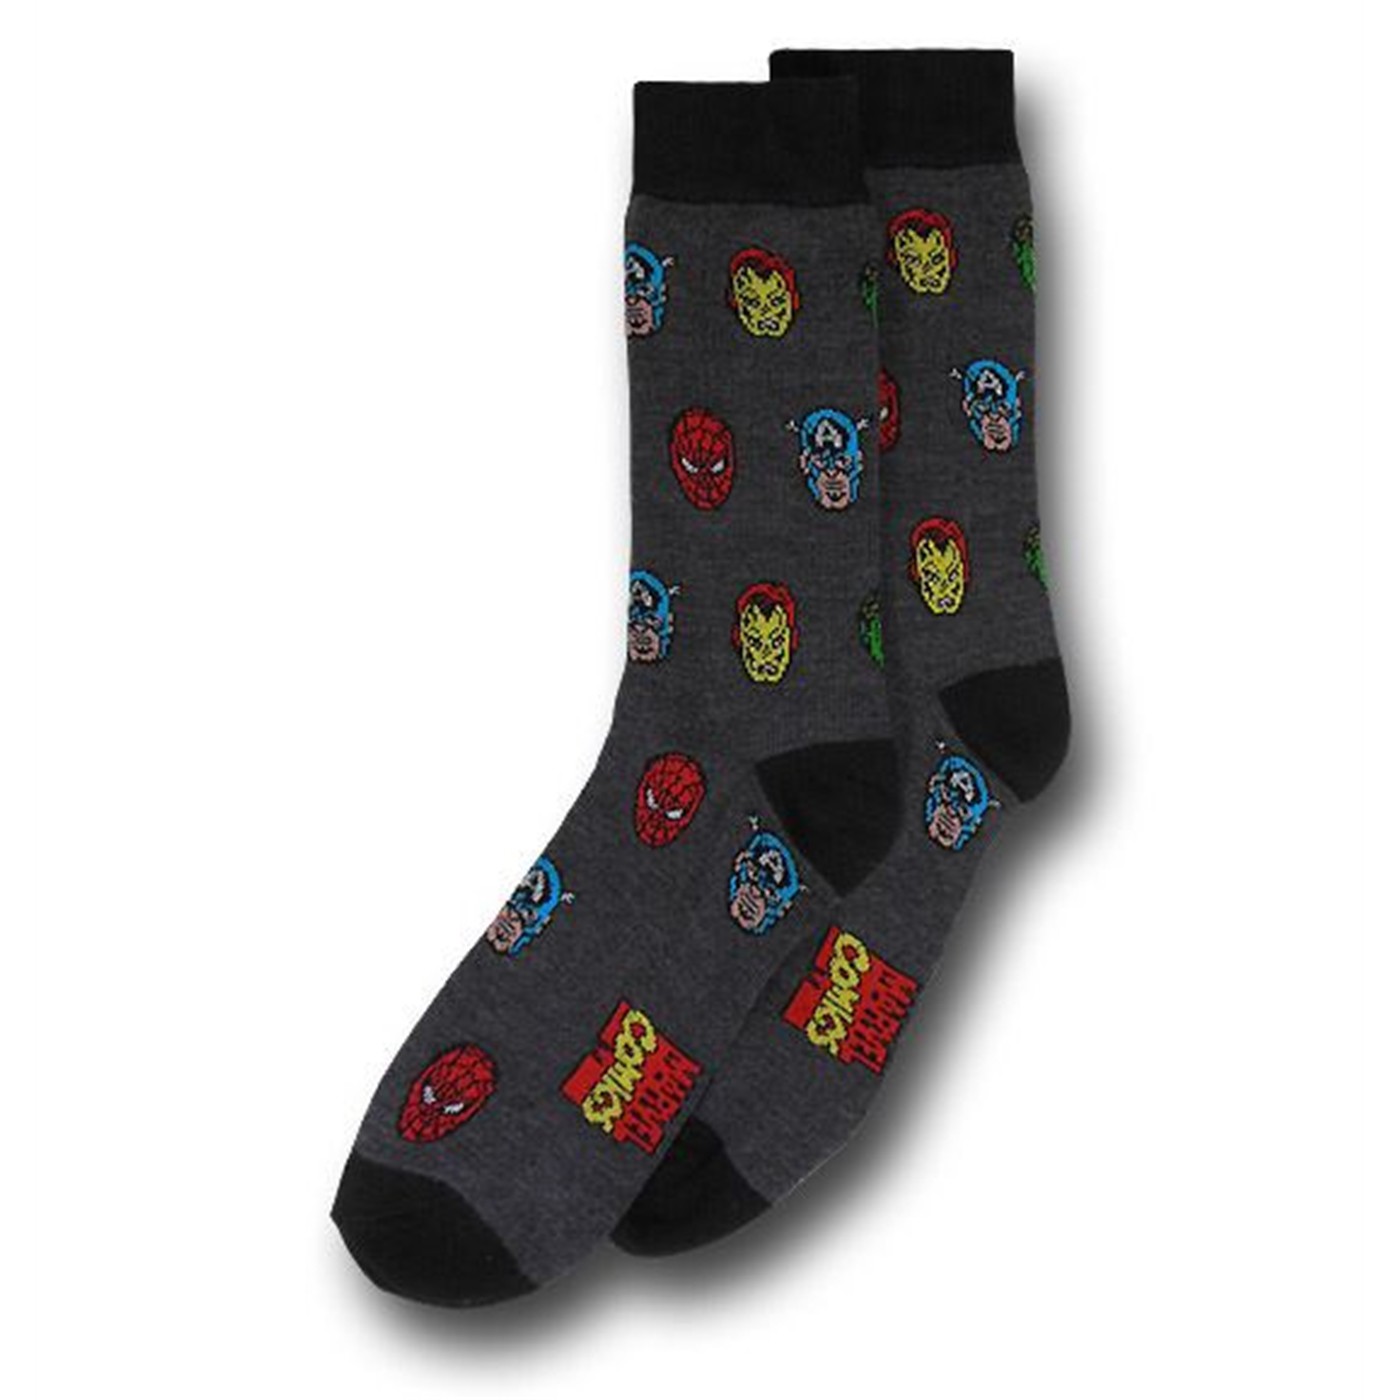 Marvel Heroes Collage and Mini Heads Socks 2-Pack